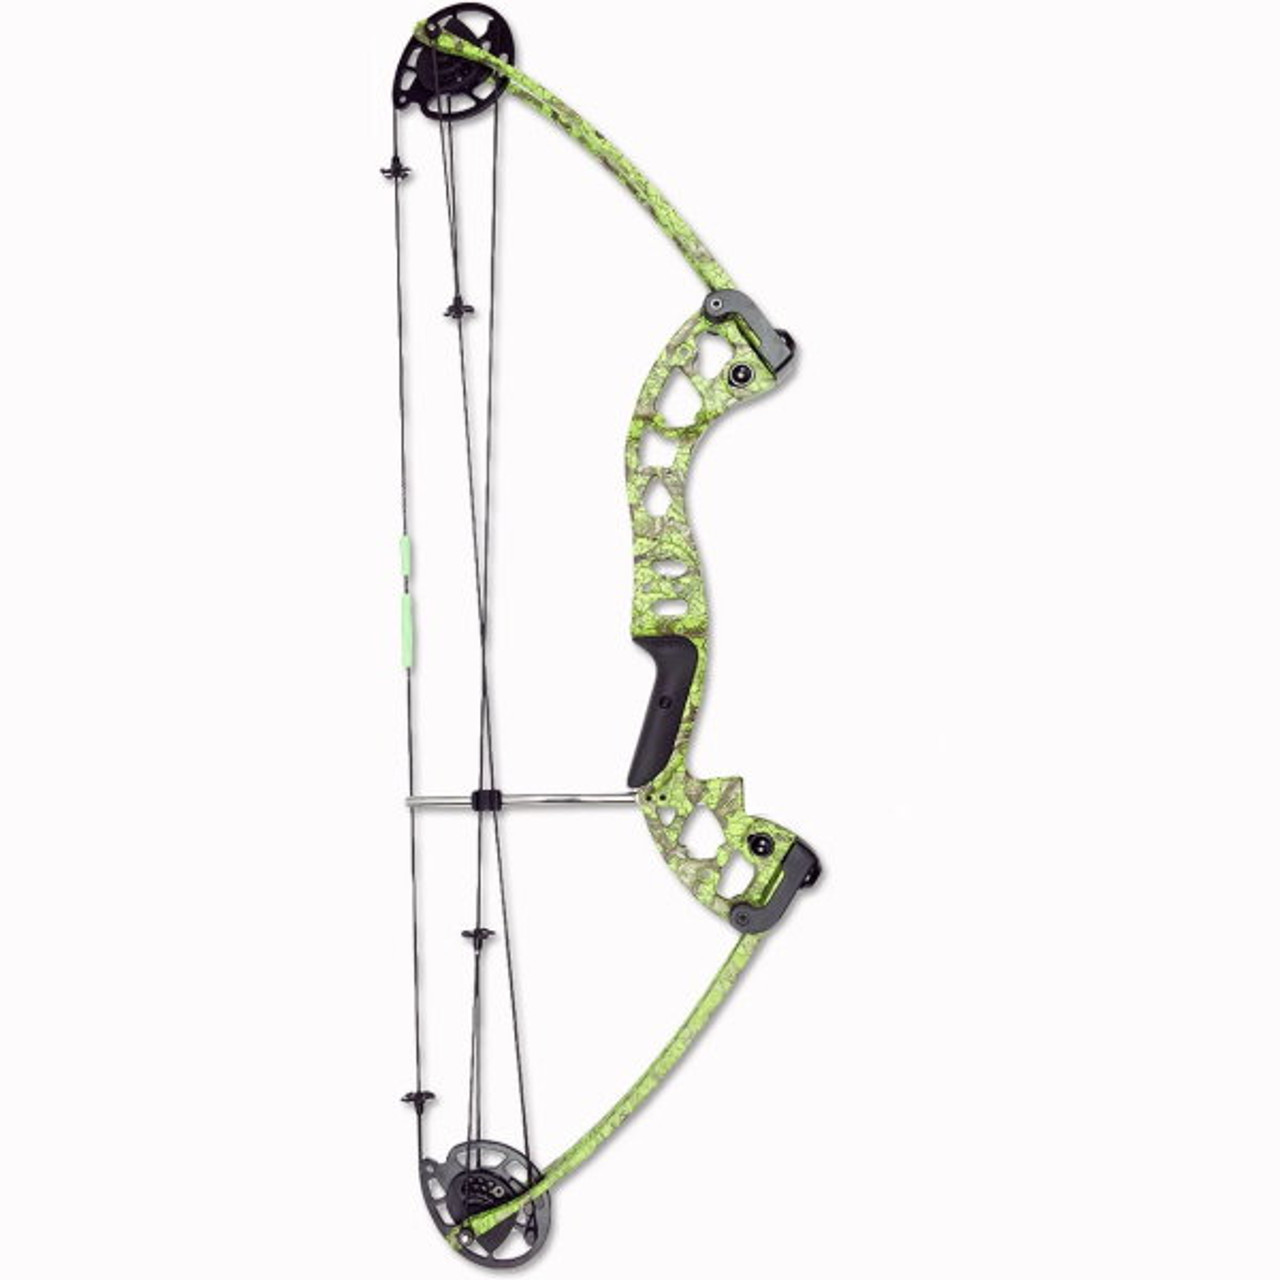 Muzzy Vice Bowfishing Bow - Archery Country